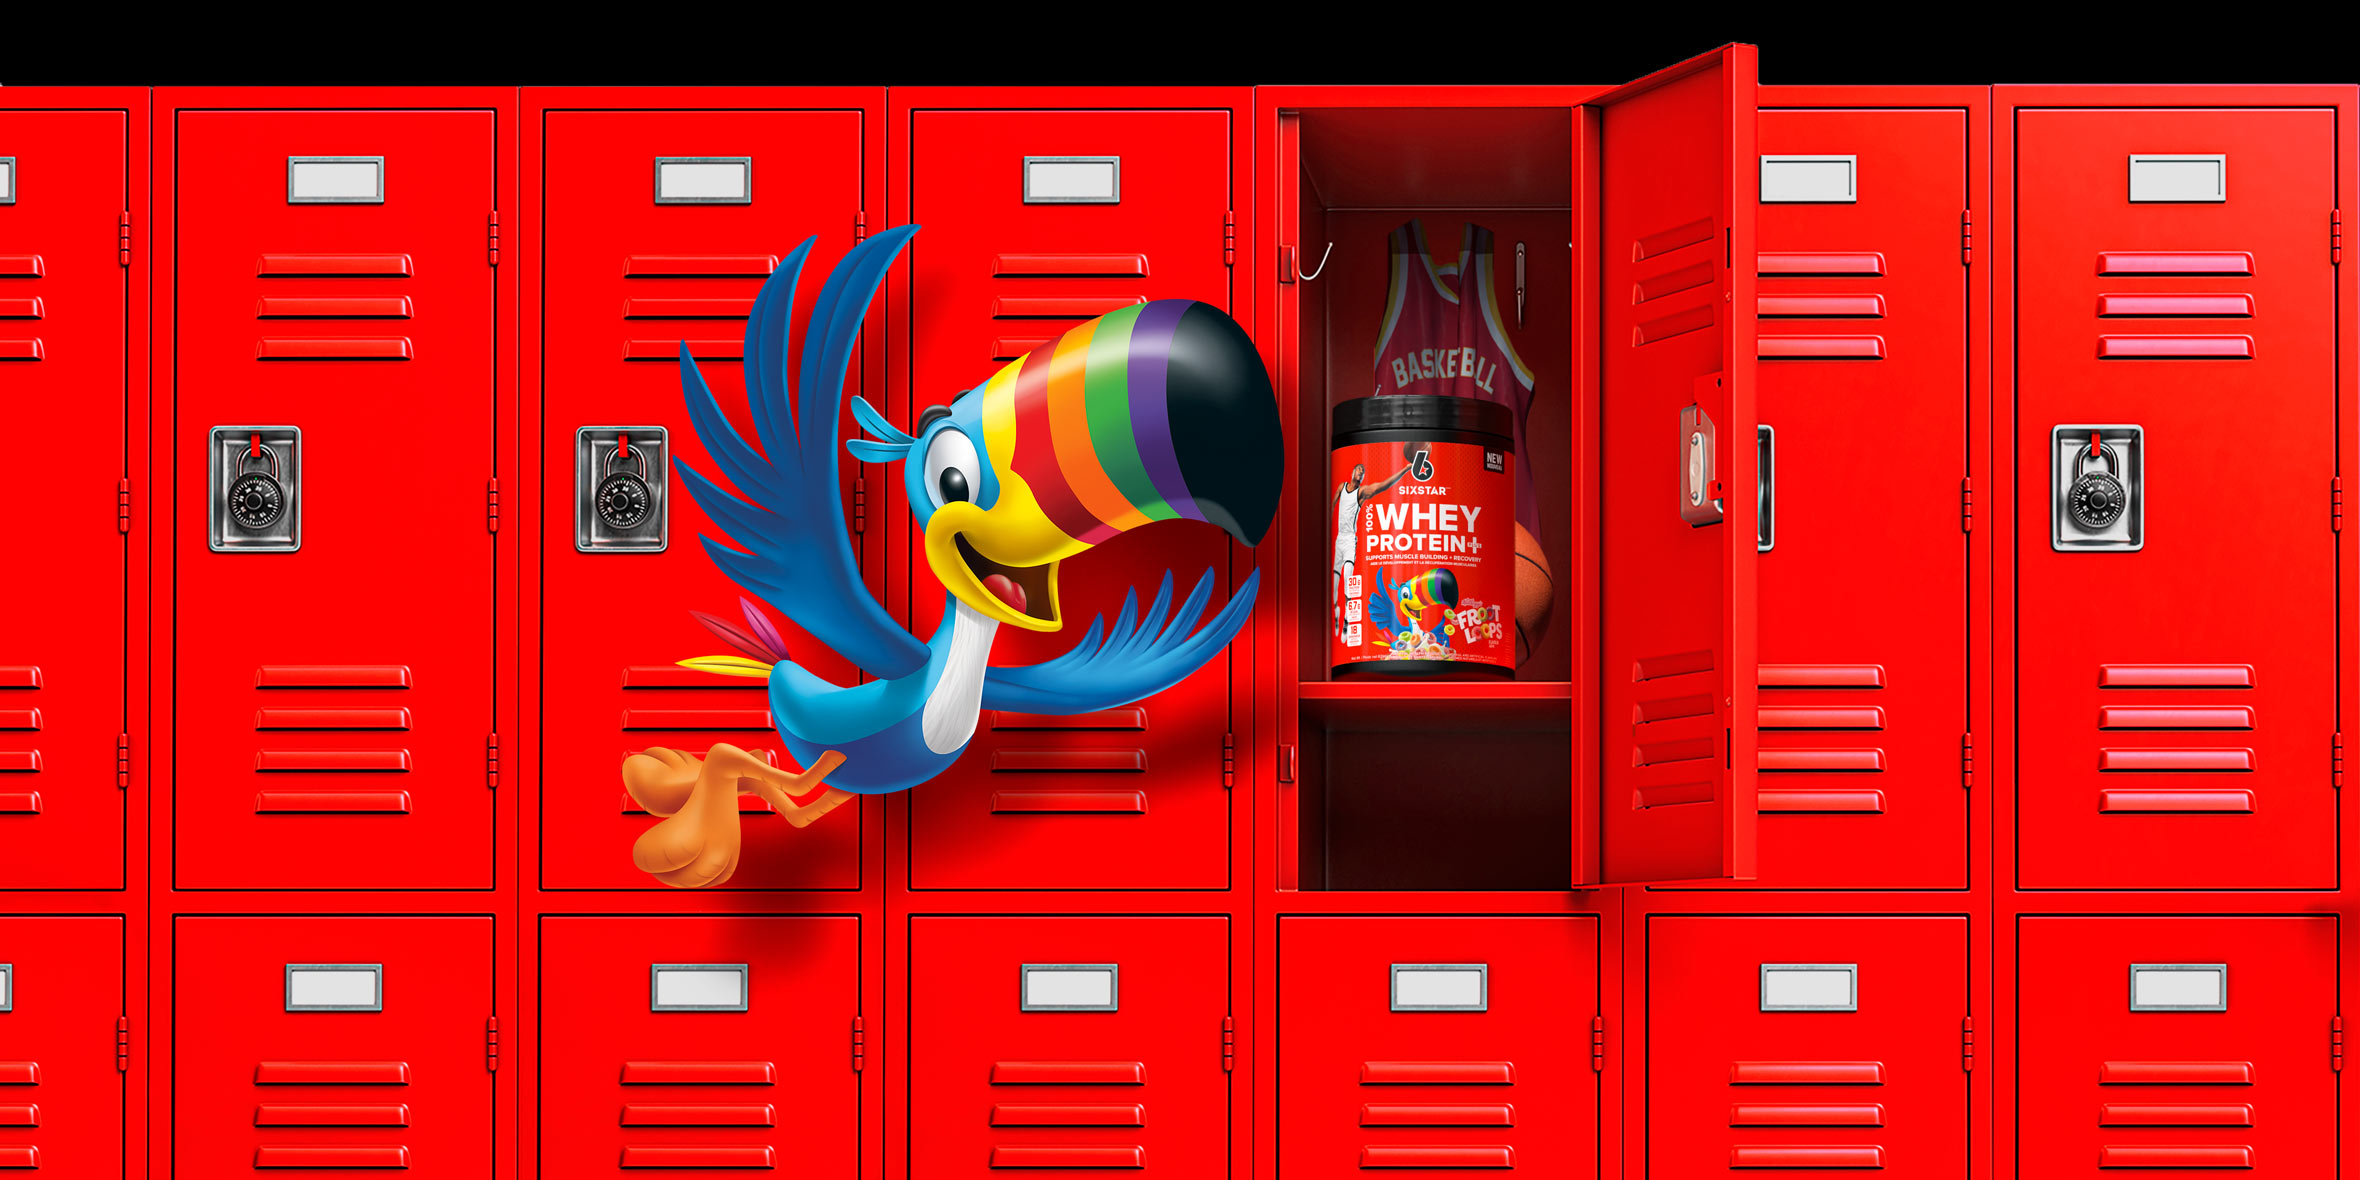 100% Whey Protein Plus Kellogg's Froot Loops® at school